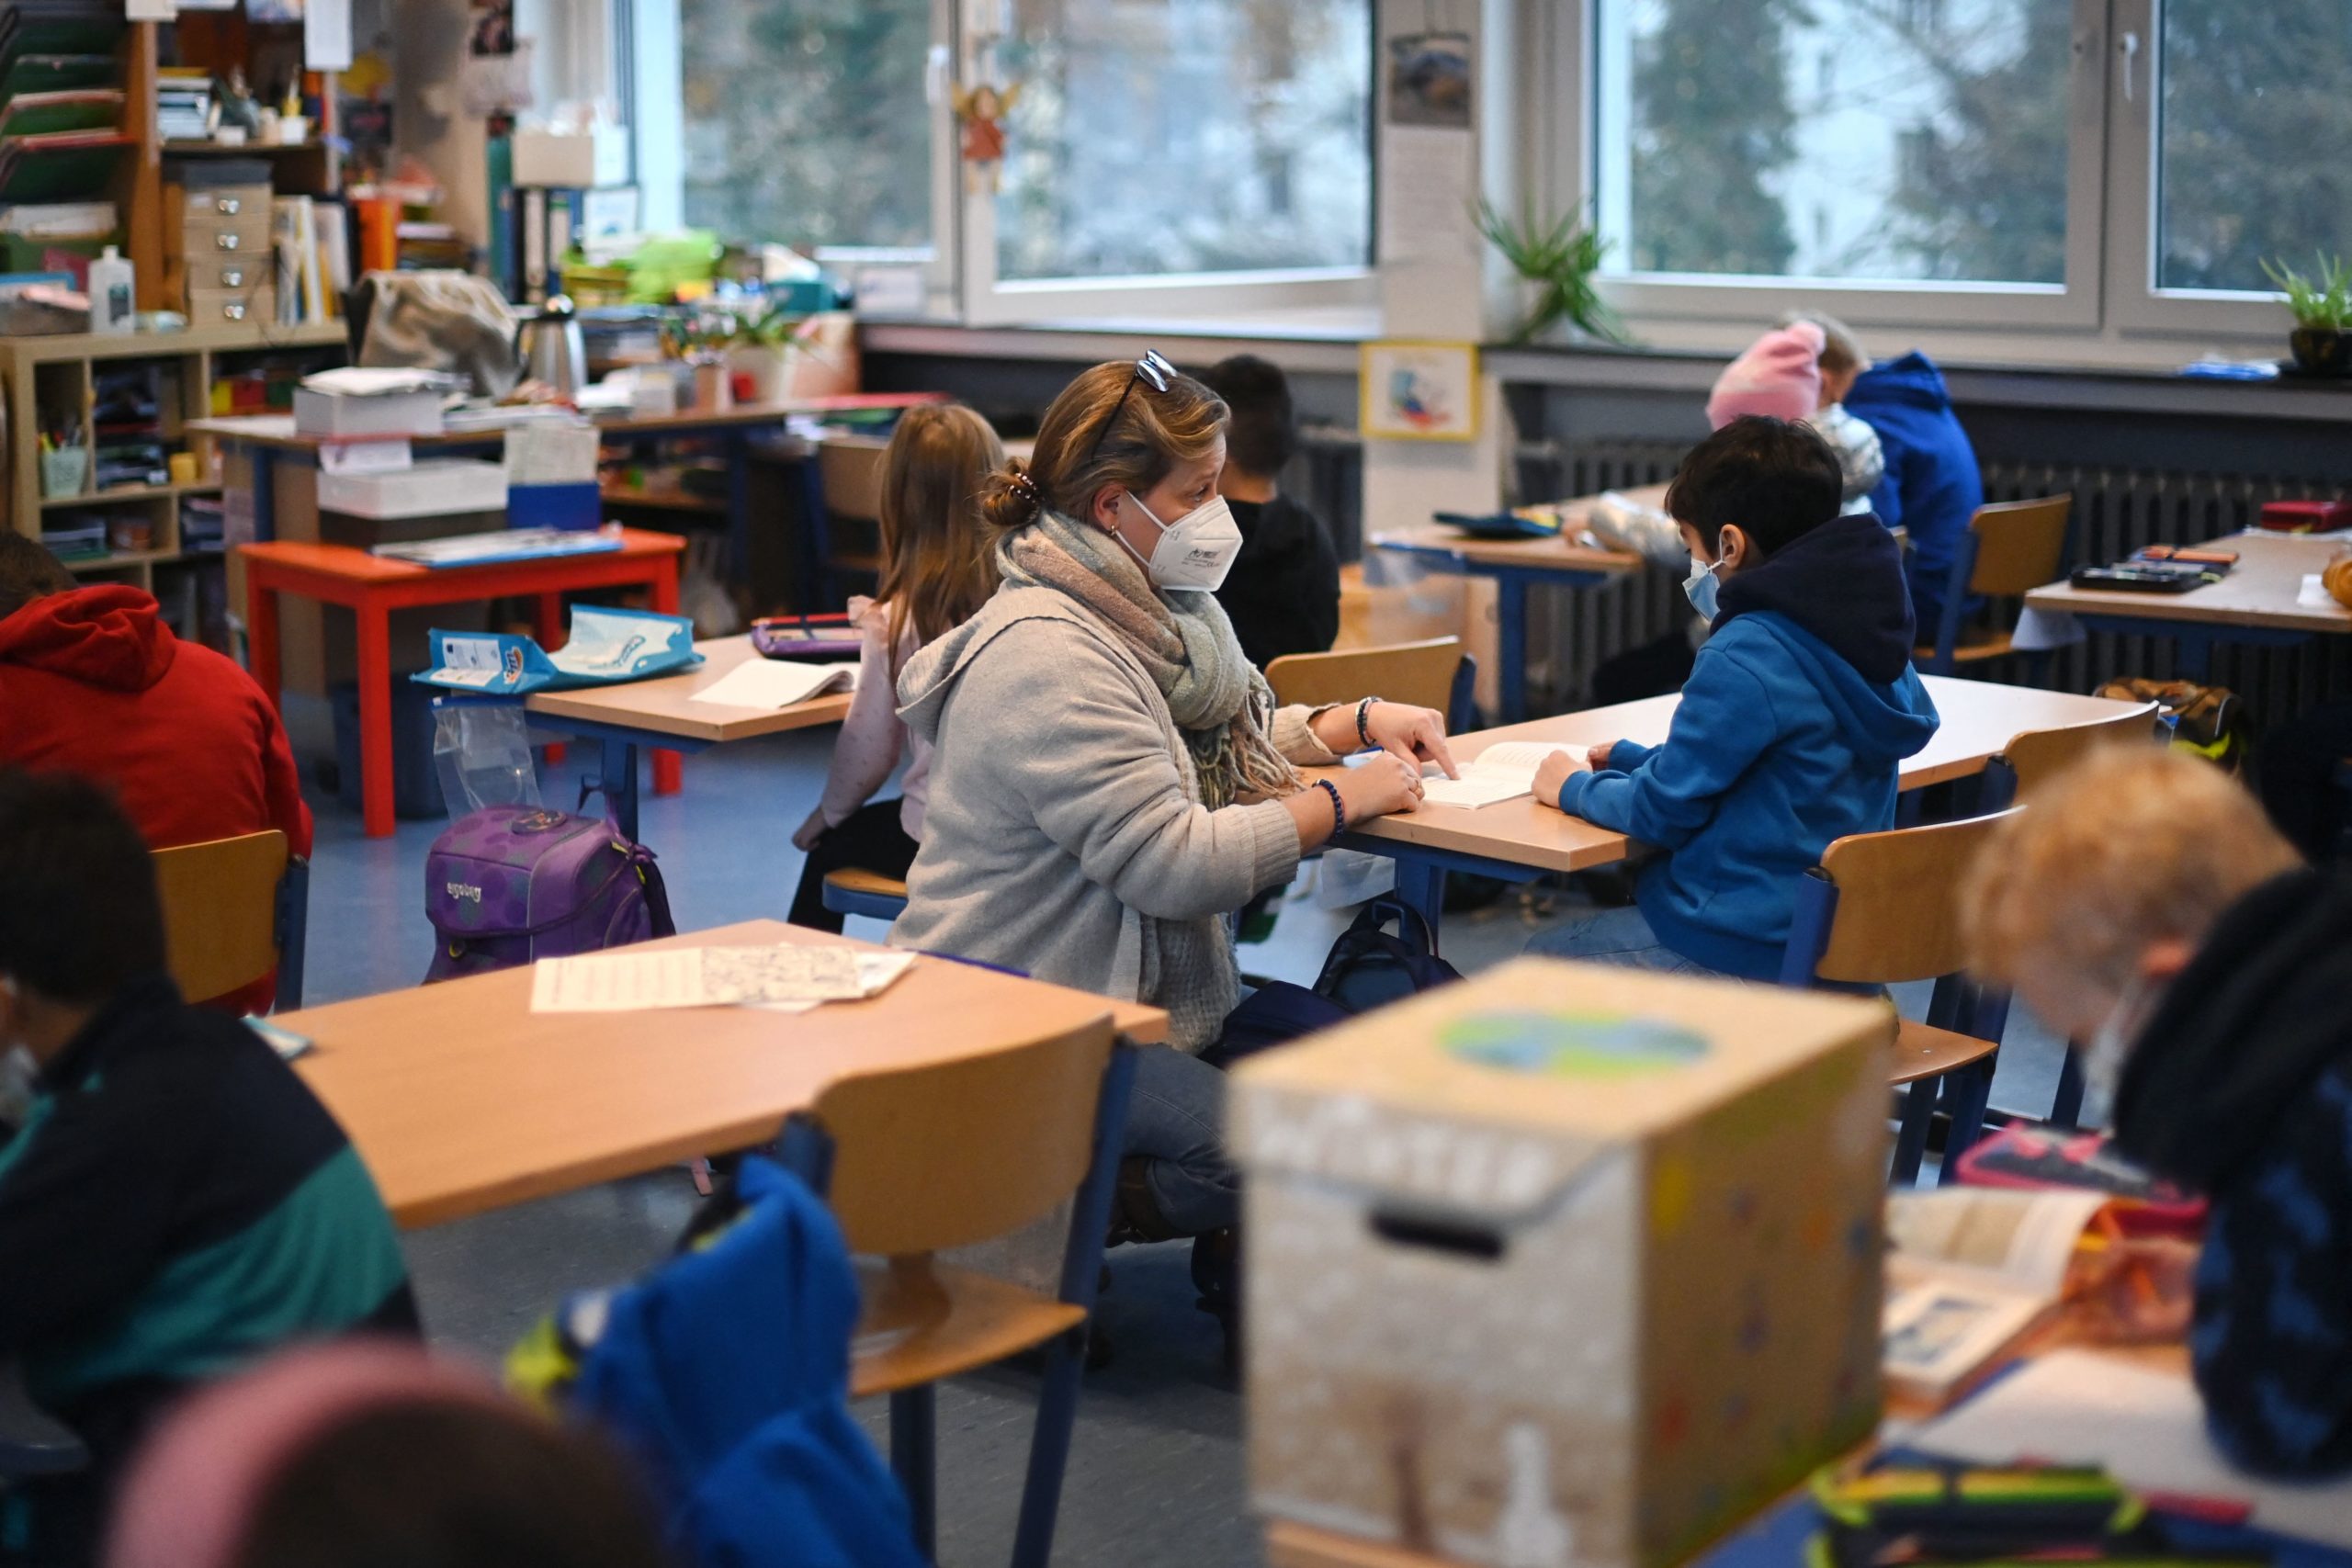 A teacher works with children of a school class during a lesson in their classroom at the Petri primary school in Dortmund, western Germany, on November 23, 2021 amid the novel coronavirus / COVID-19 pandemic. (Photo by INA FASSBENDER/AFP via Getty Images)